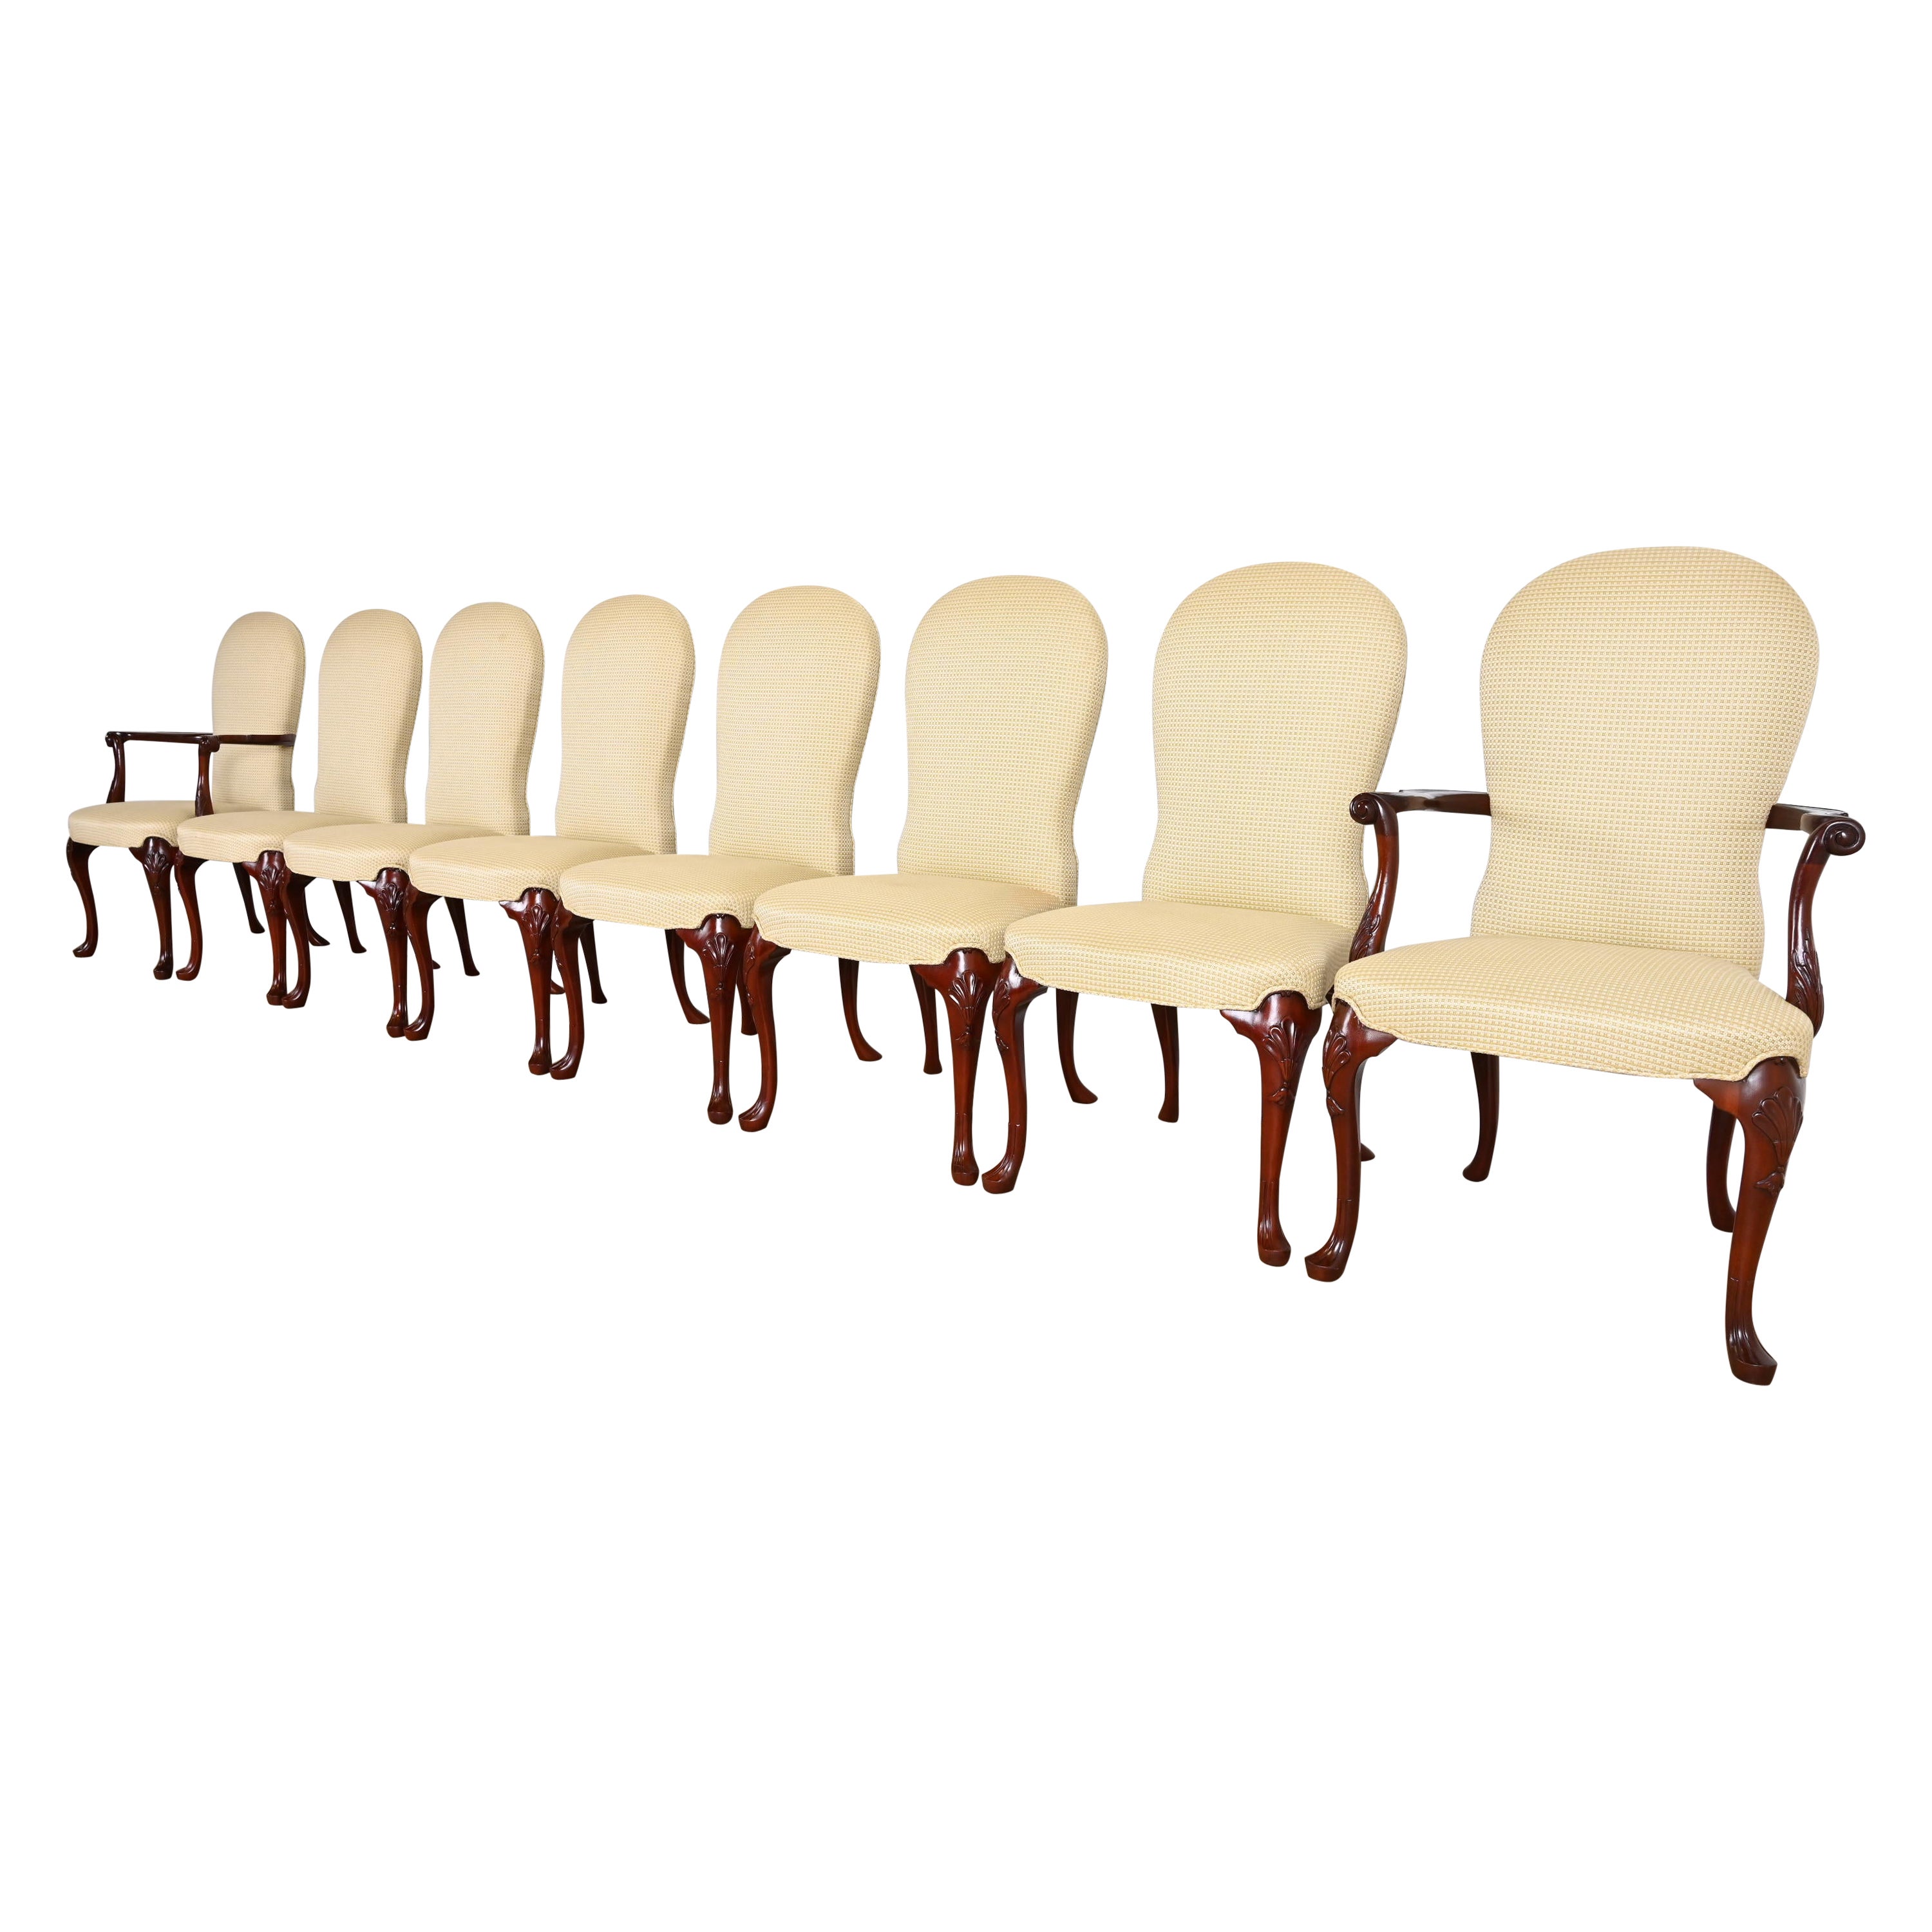 Kindel Furniture Georgian Carved Mahogany Upholstered Dining Chairs For Sale